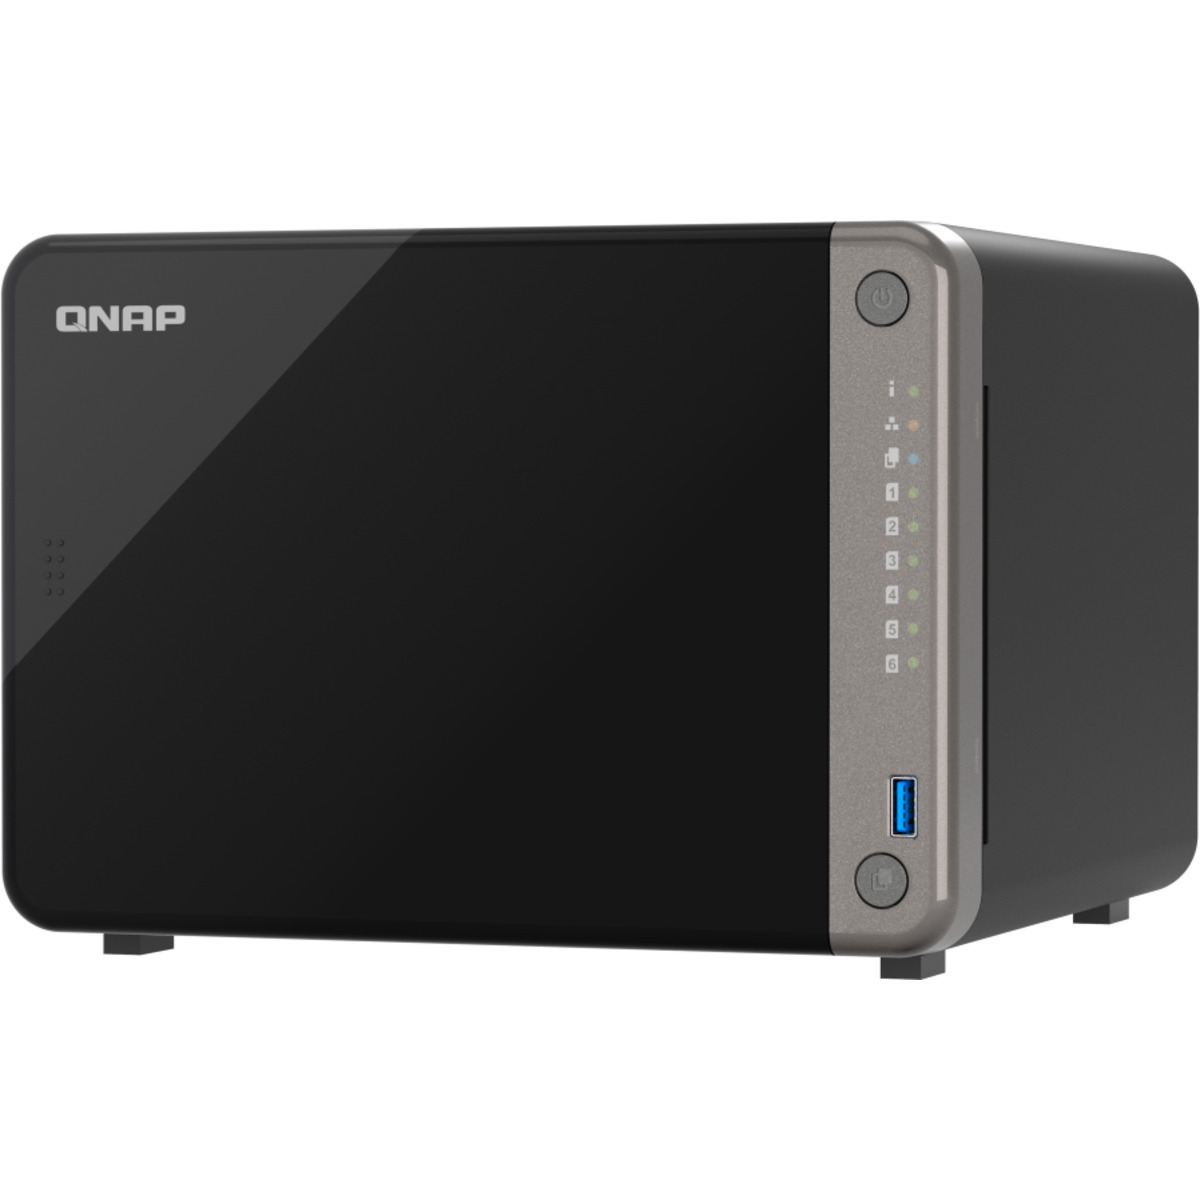 QNAP TS-AI642 18tb 6-Bay Desktop Multimedia / Power User / Business NAS - Network Attached Storage Device 3x6tb Western Digital Red Plus WD60EFPX 3.5 5640rpm SATA 6Gb/s HDD NAS Class Drives Installed - Burn-In Tested TS-AI642